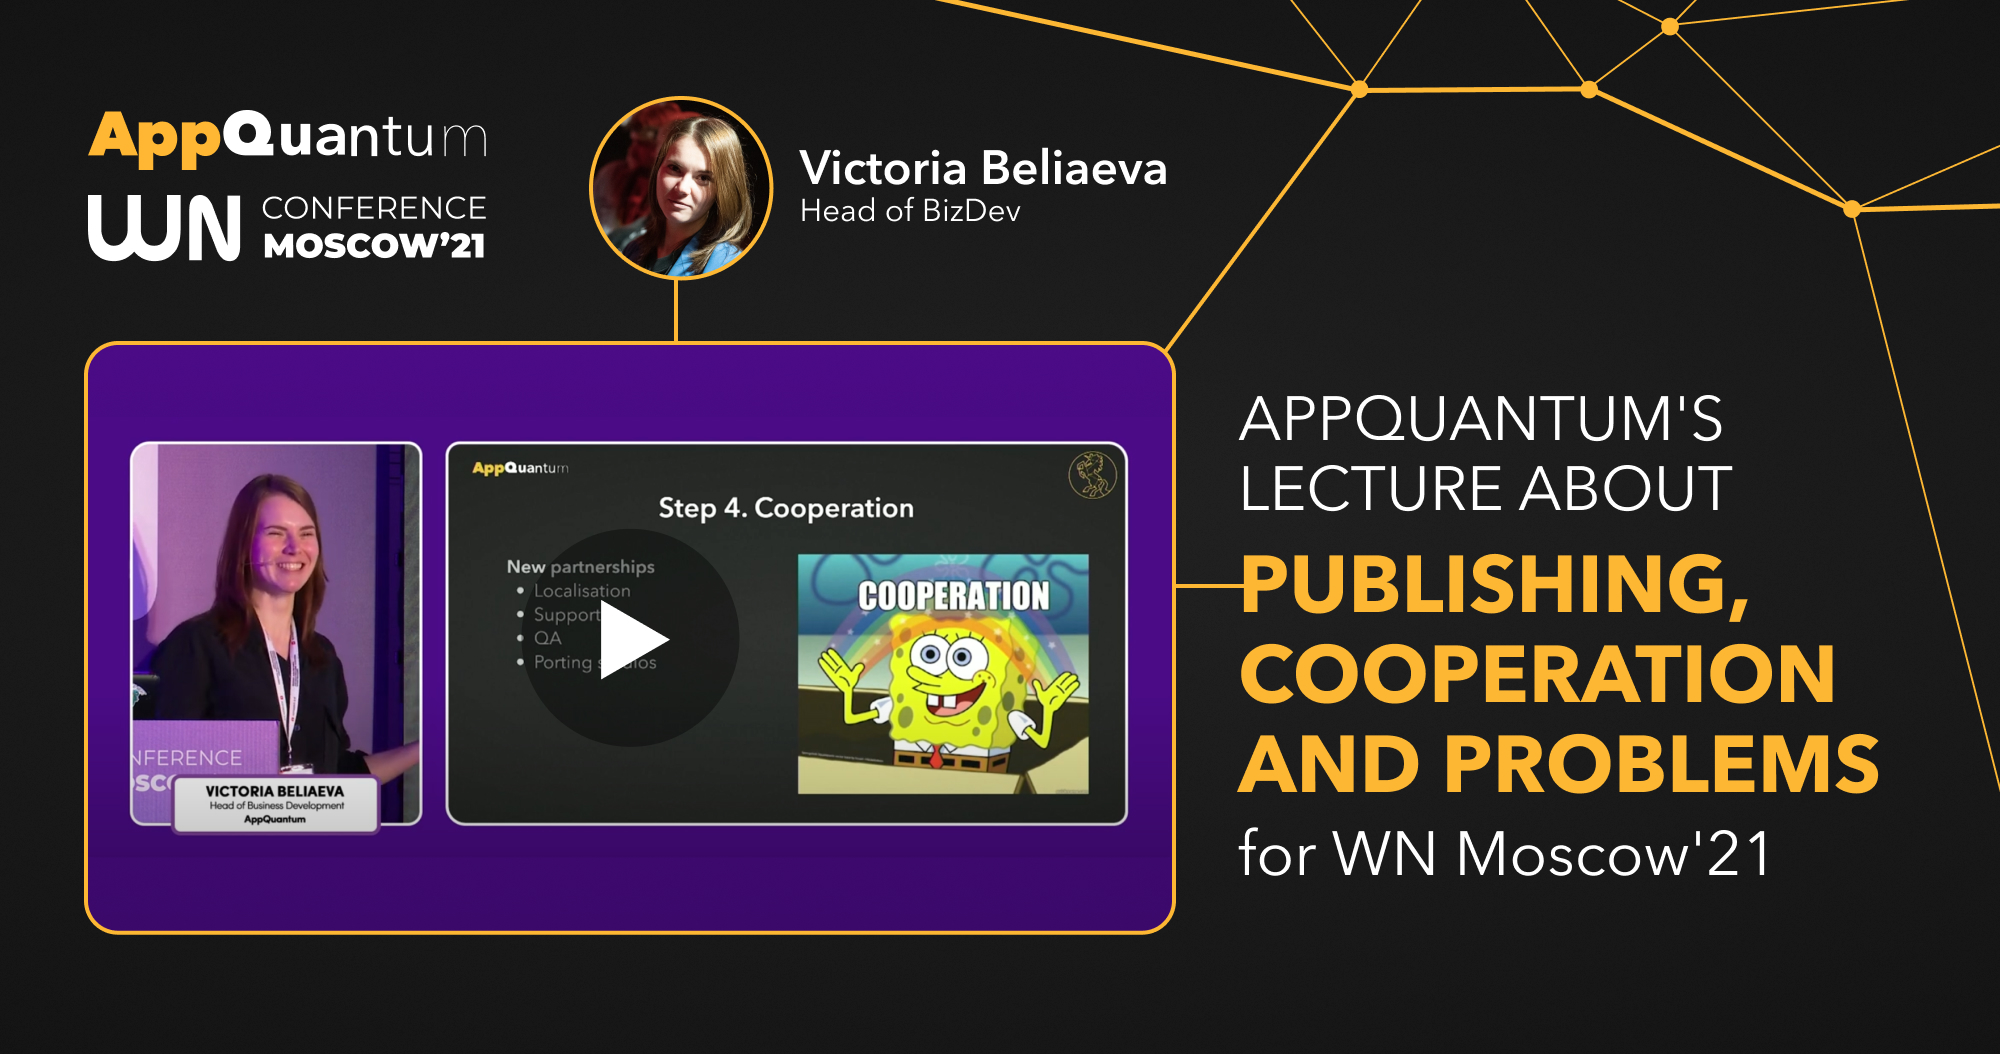 AppQuantum's Lecture About Publishing, Cooperation and Problems for WN Moscow'21